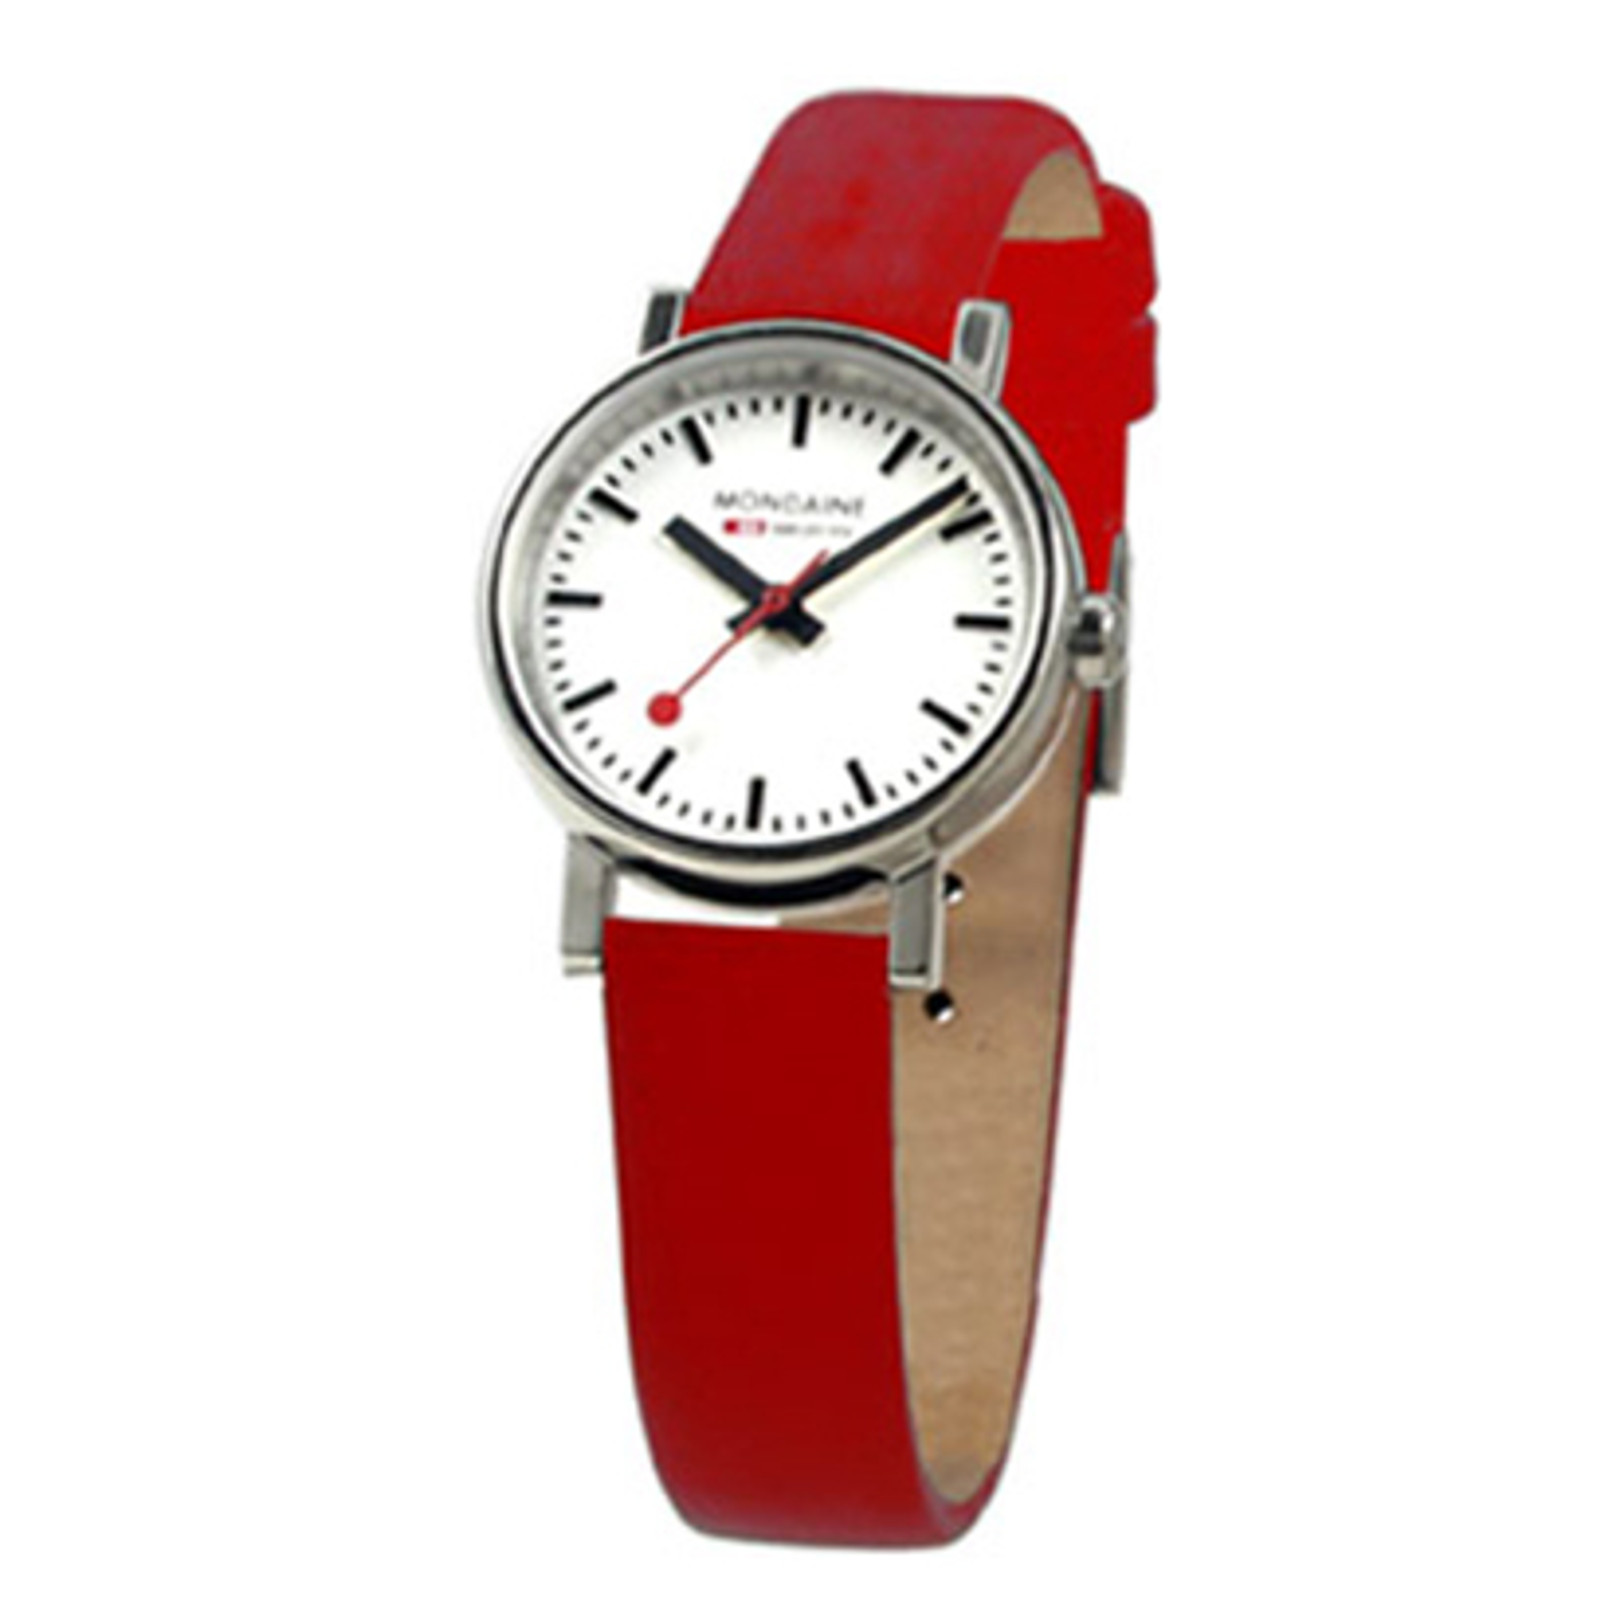 Evo 2 Petite 26mm - Red Leather Strap White Face